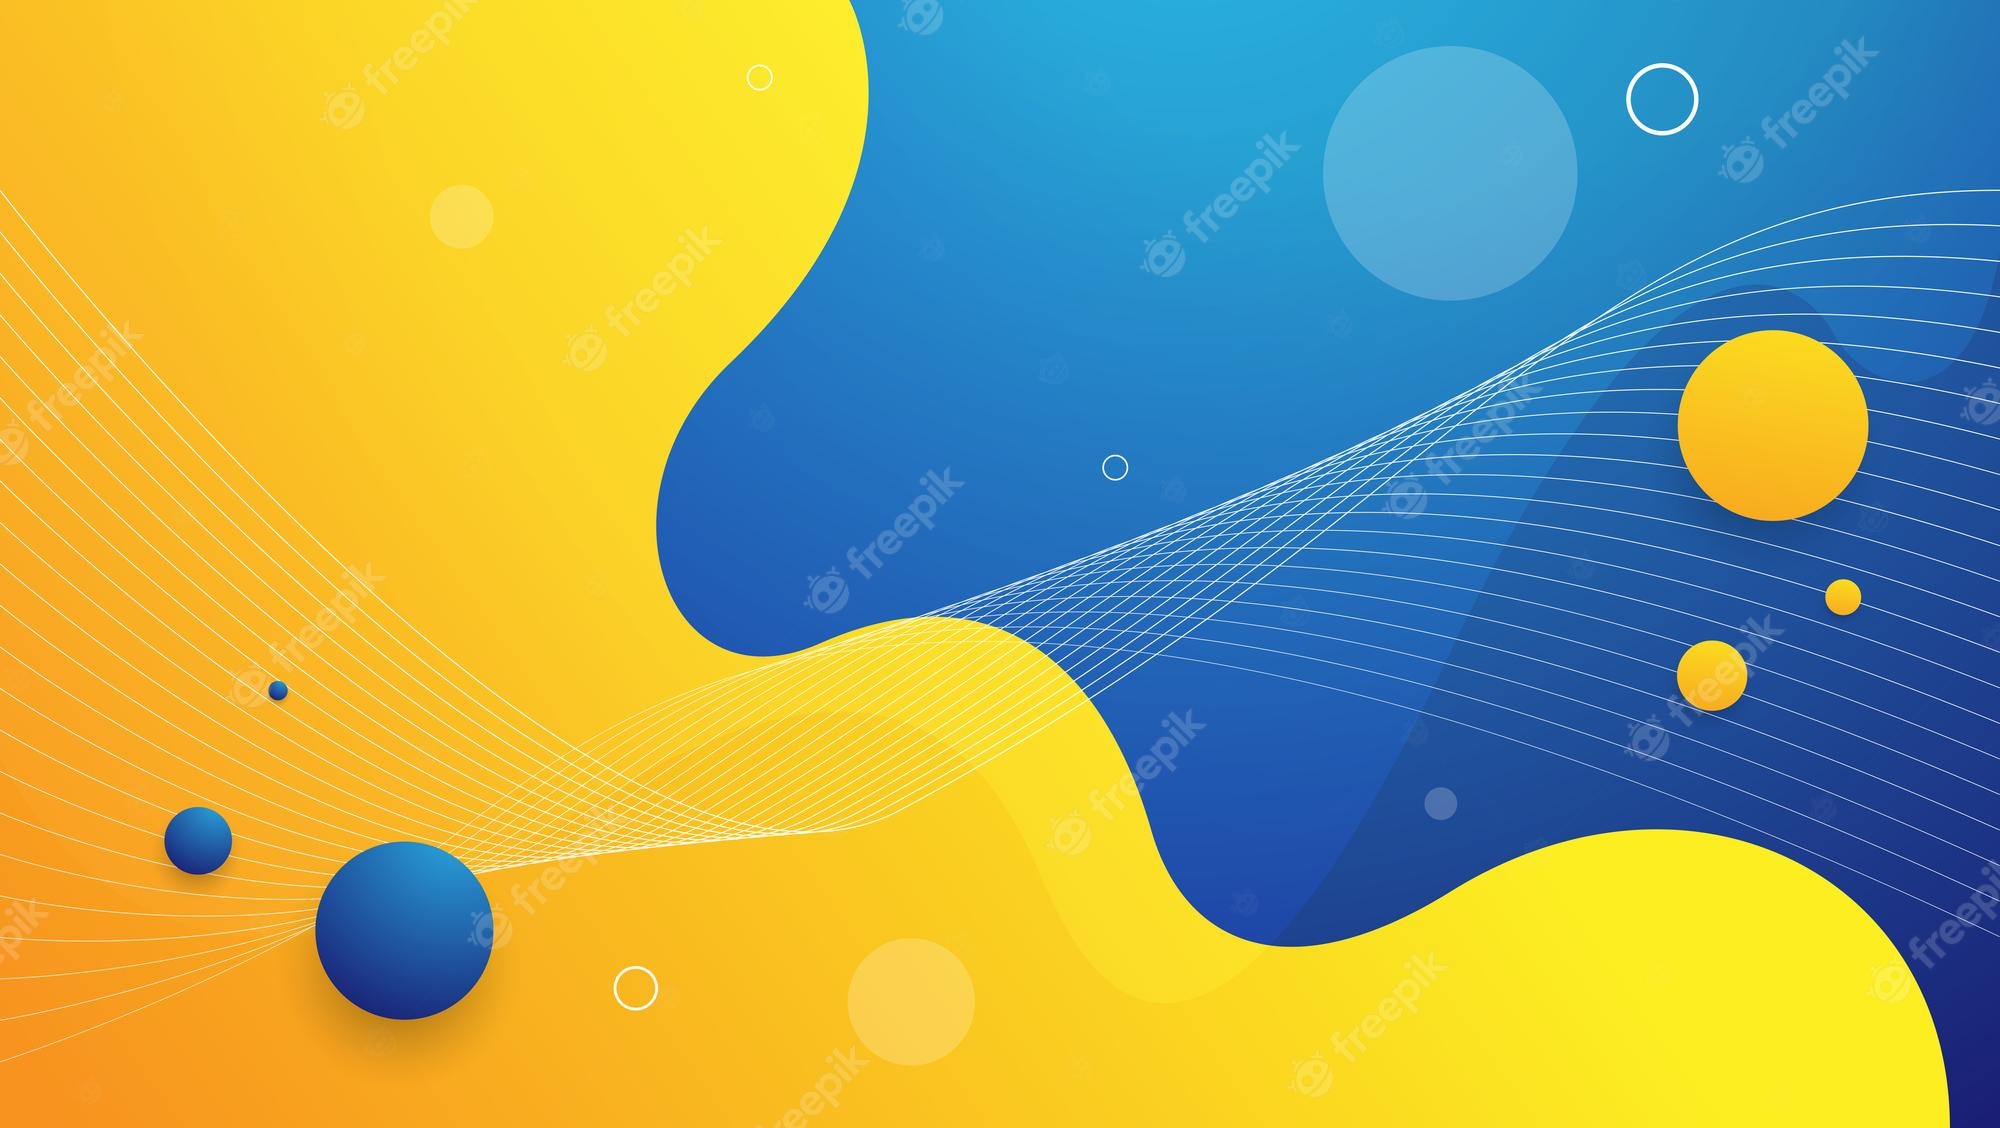 Blue And Yellow Abstract Background